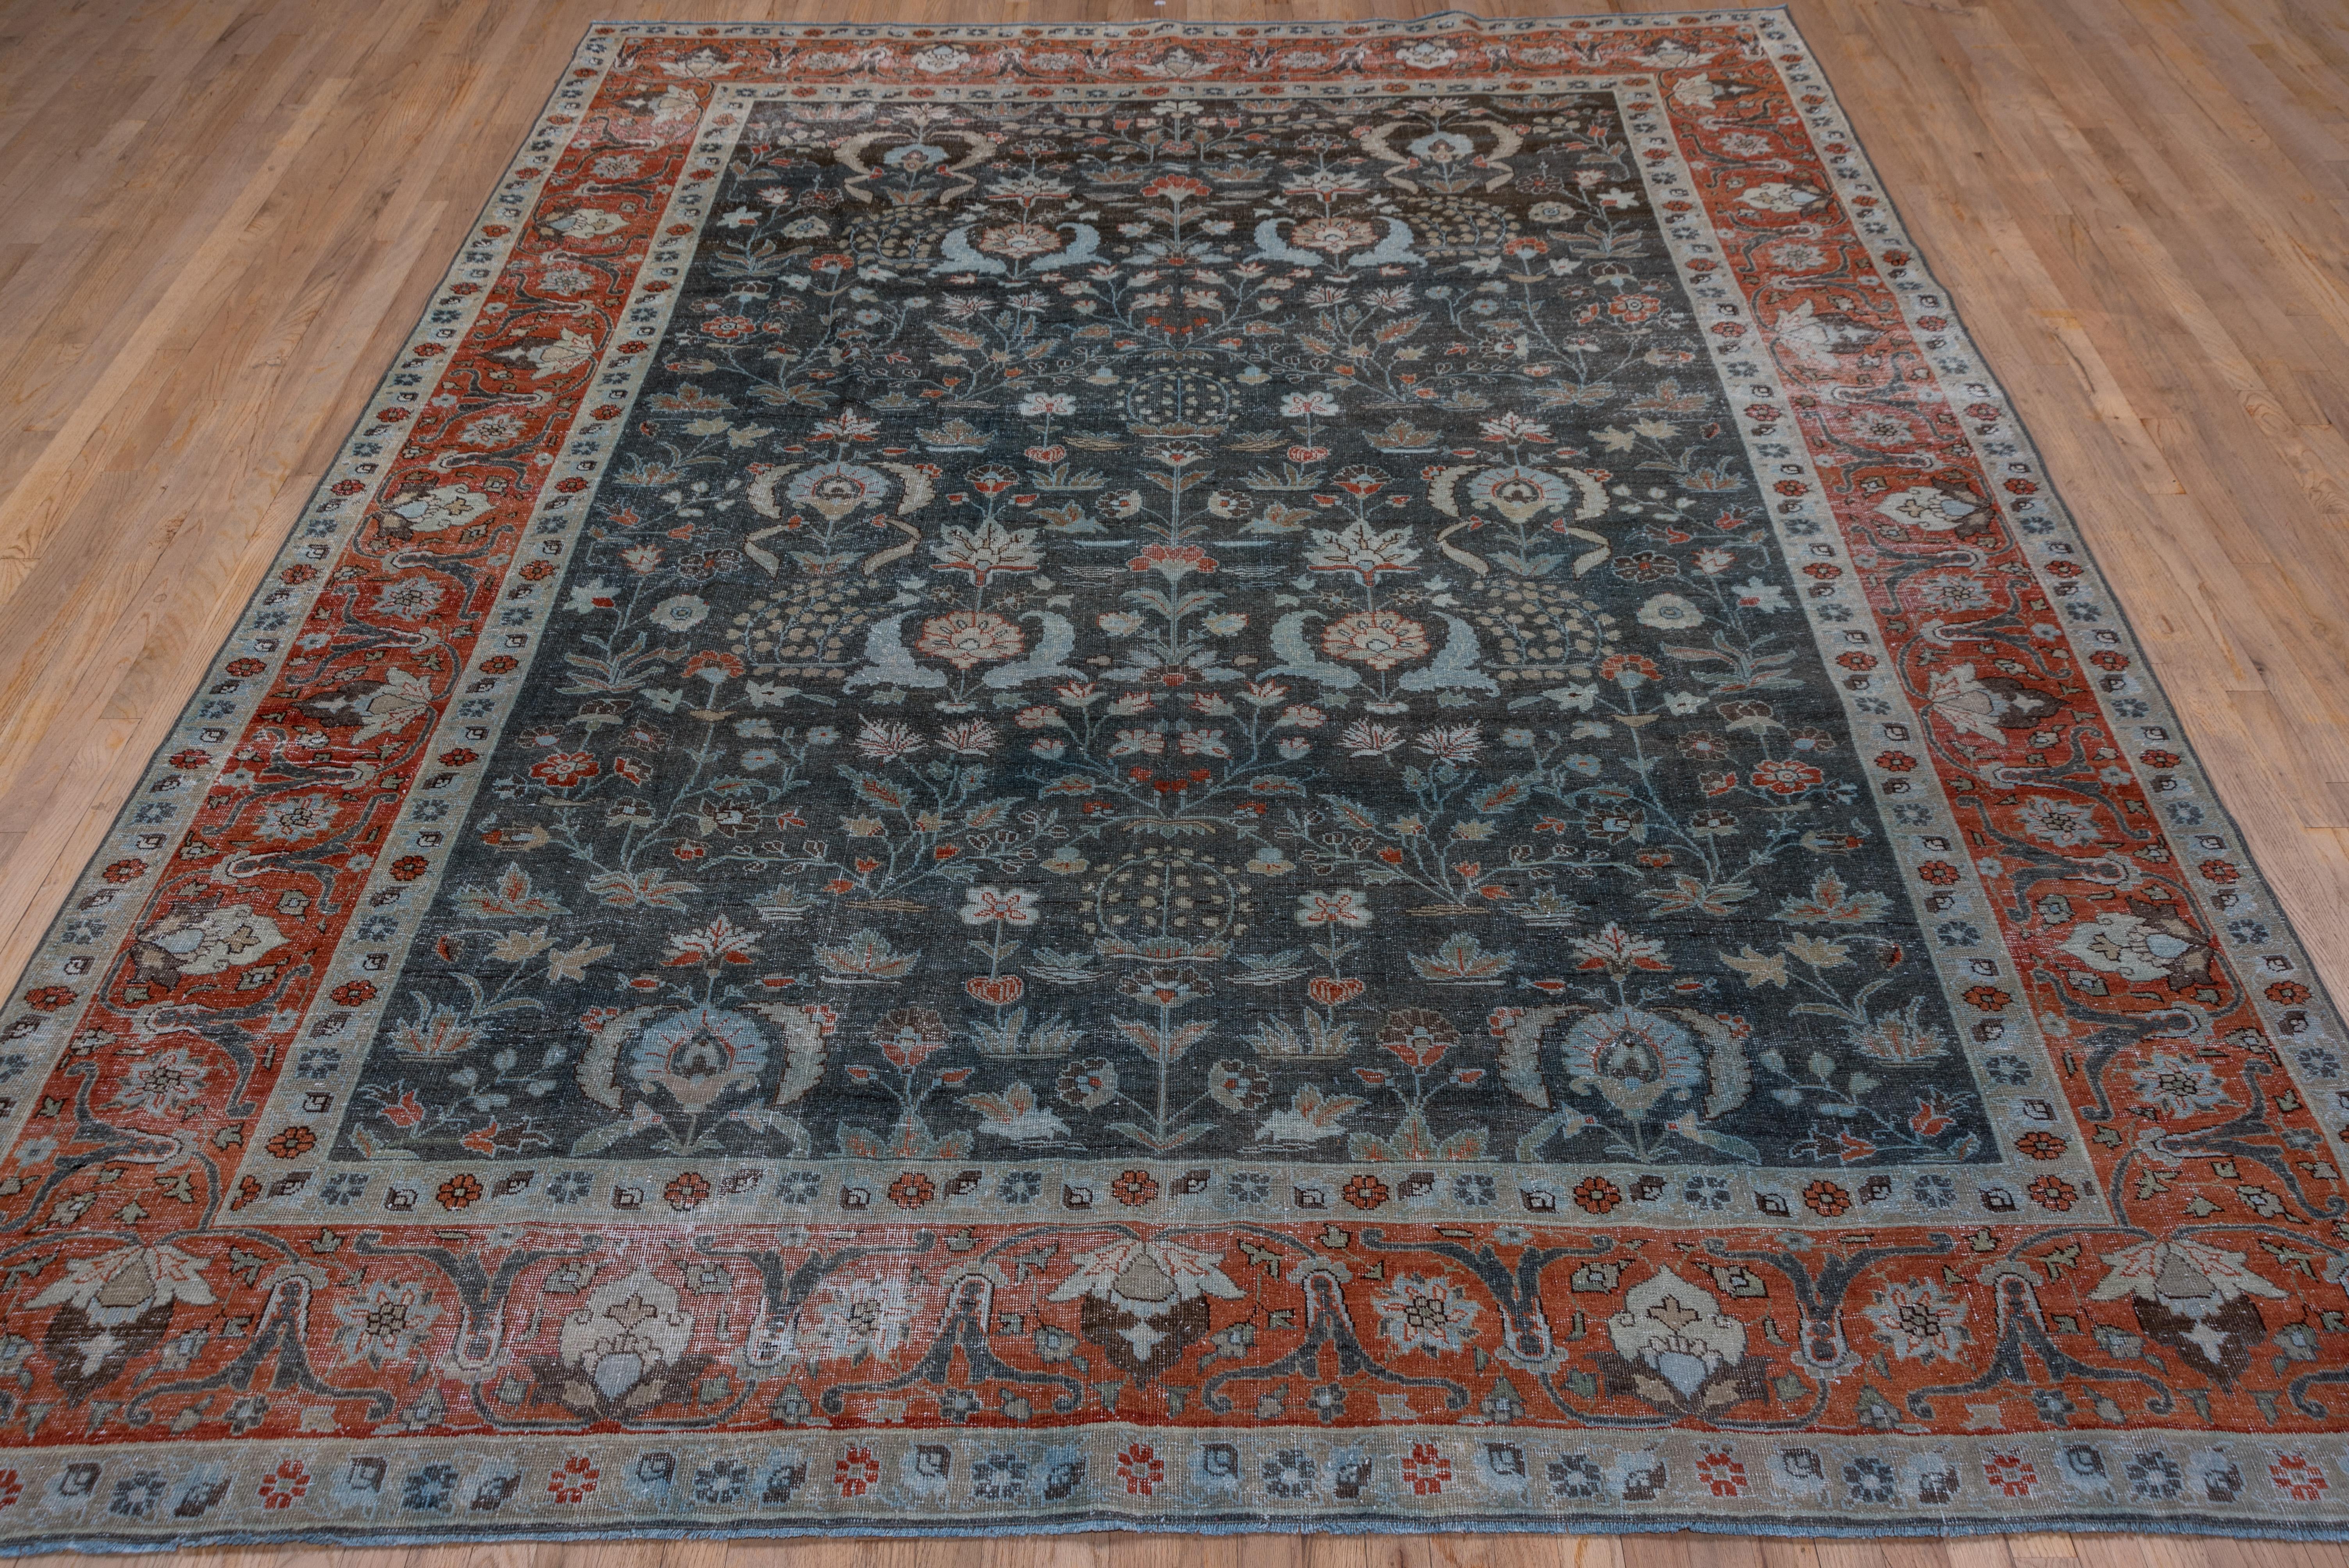 Hand-Knotted Antique Persian Tabriz Rug, Blue Green Field, Multicolored Double Borders For Sale